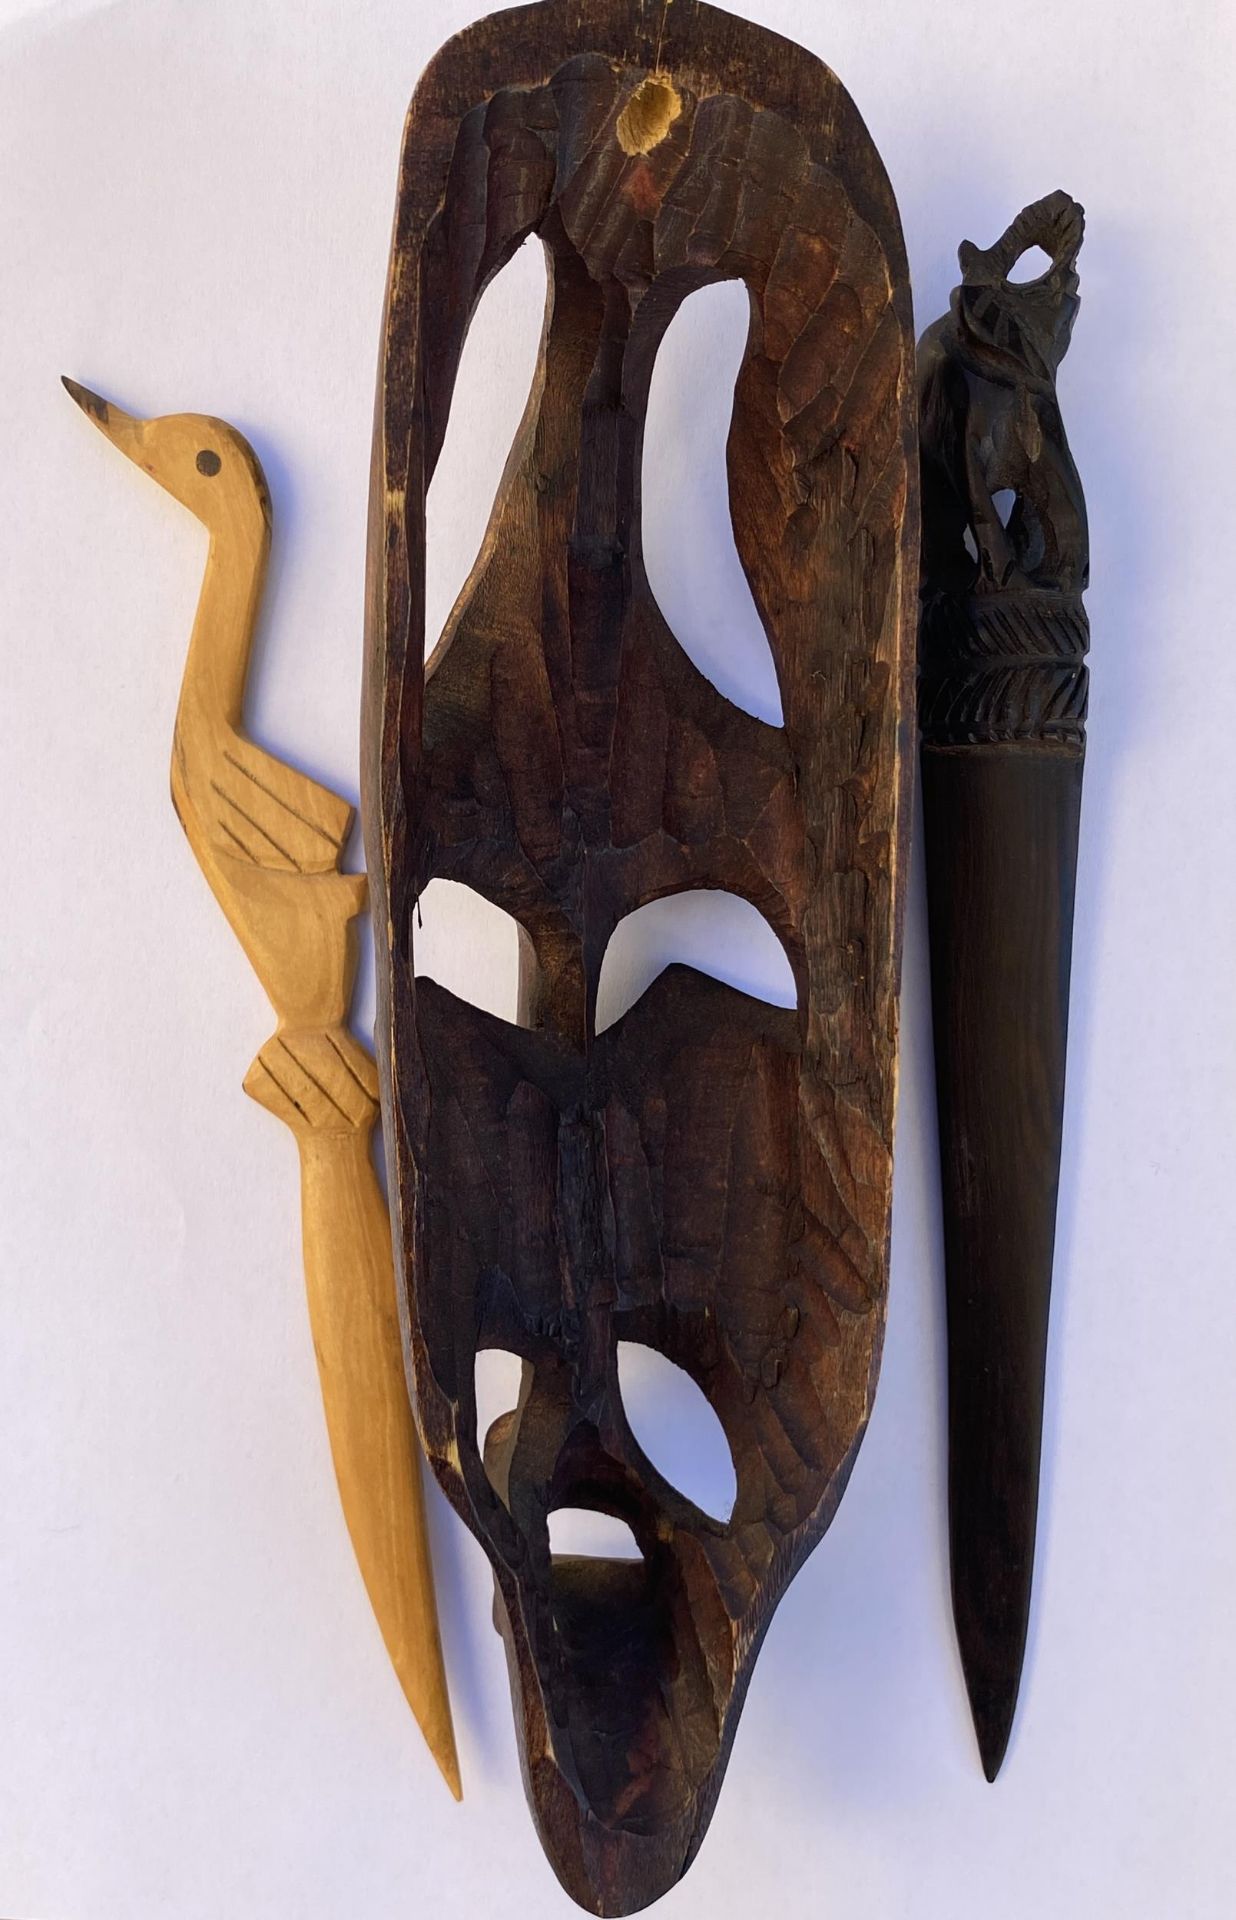 THREE AFRICAN TRIBAL ITEMS - WOODEN MASK, ELEPHANT CARVED WOODEN LETTER OPENER AND DUCK EXAMPLE, - Image 6 of 7